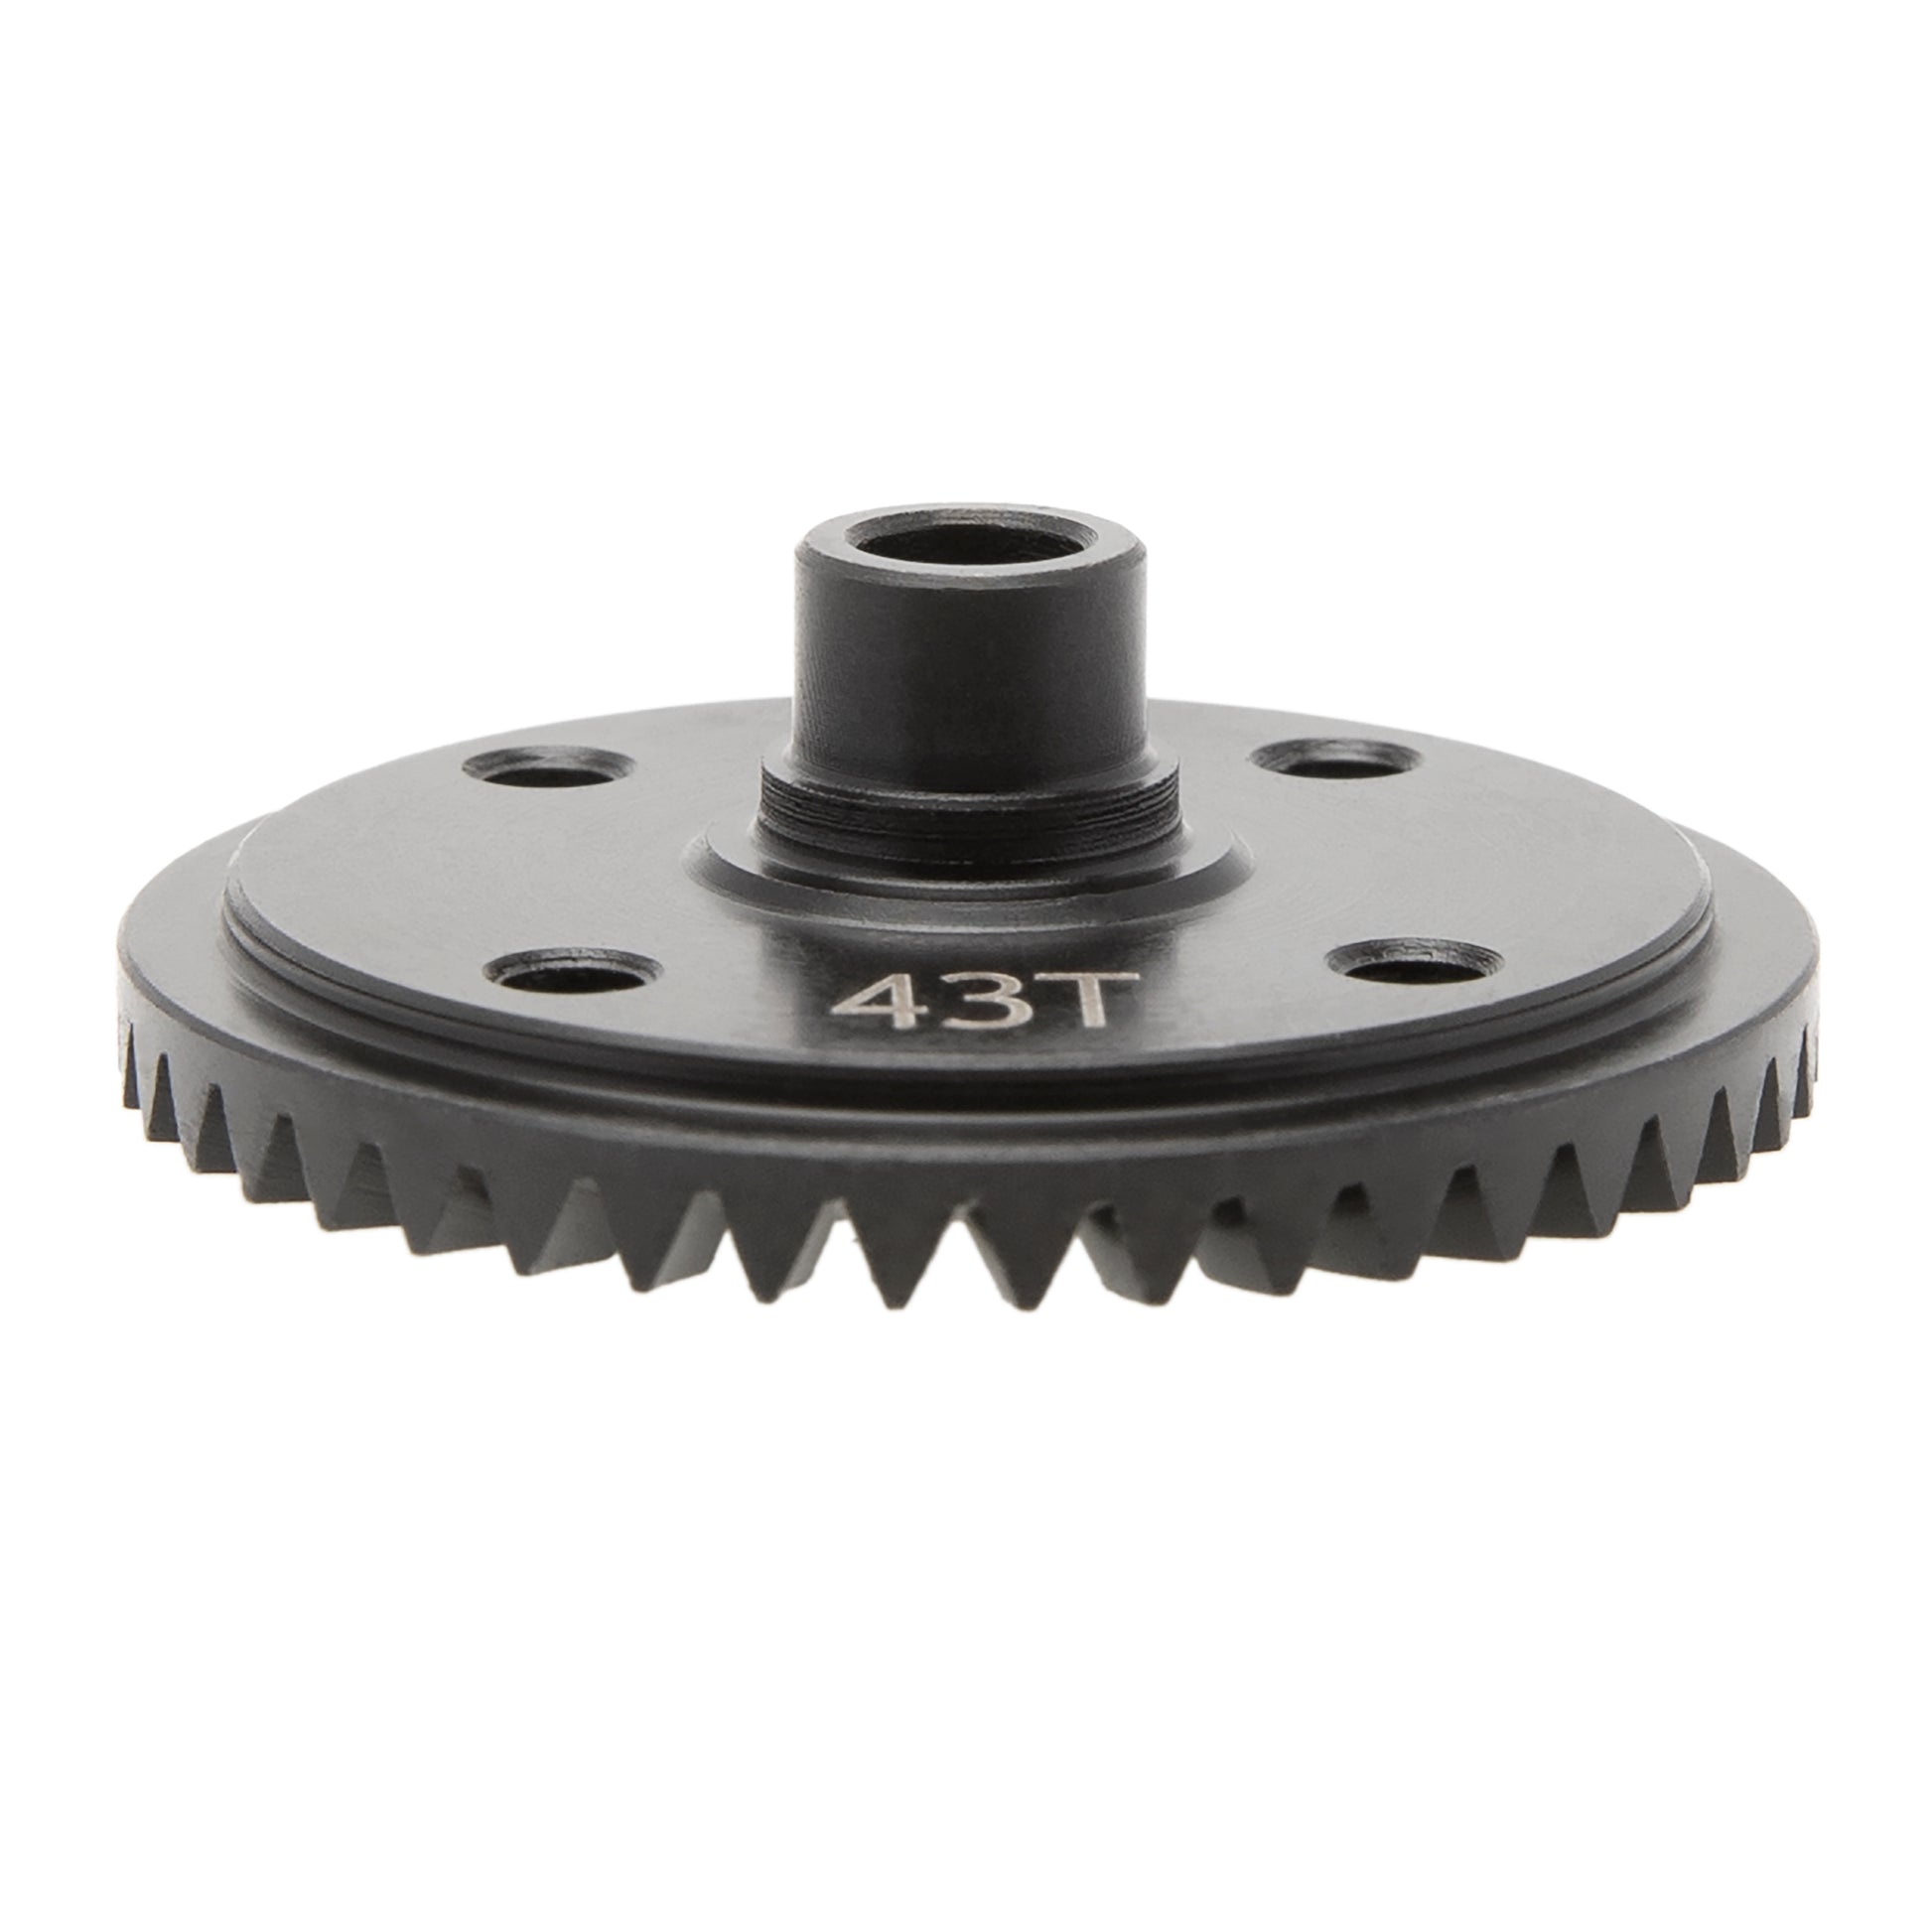 Carbon Steel Diff Gear 43T Gearbox Differential Gears Set